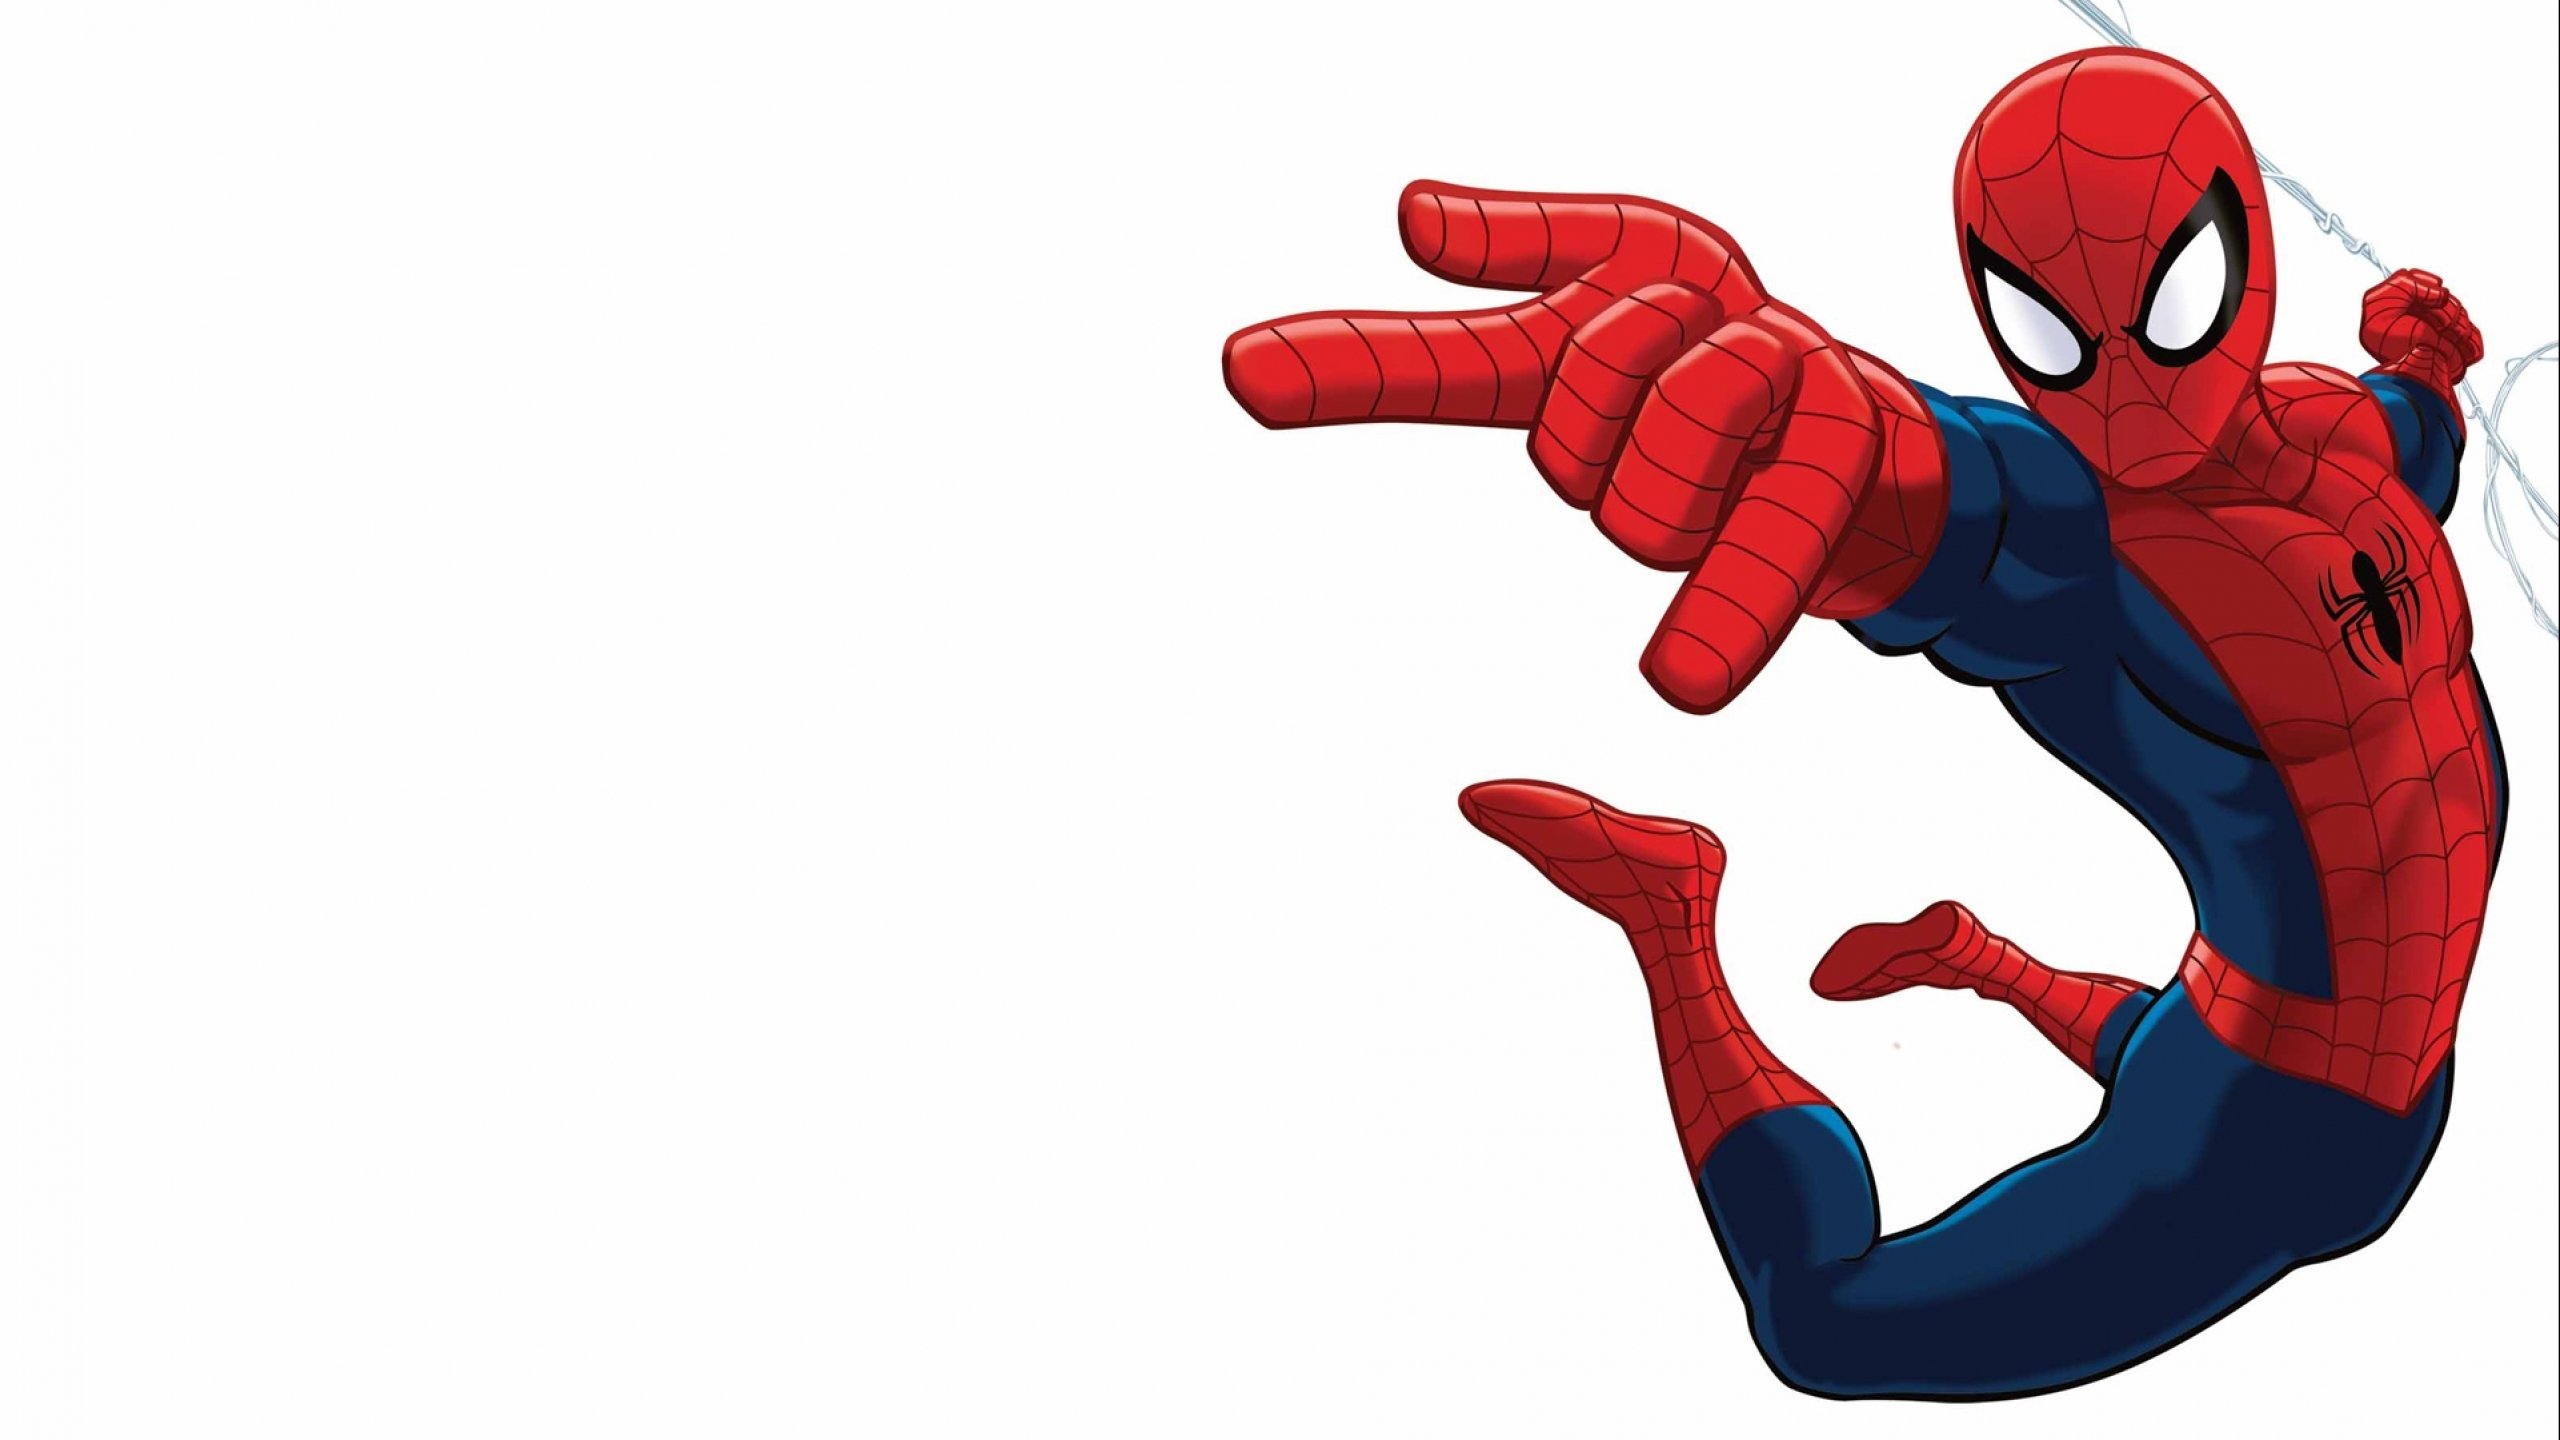 Spiderman Backgrounds Pictures Group (86+)